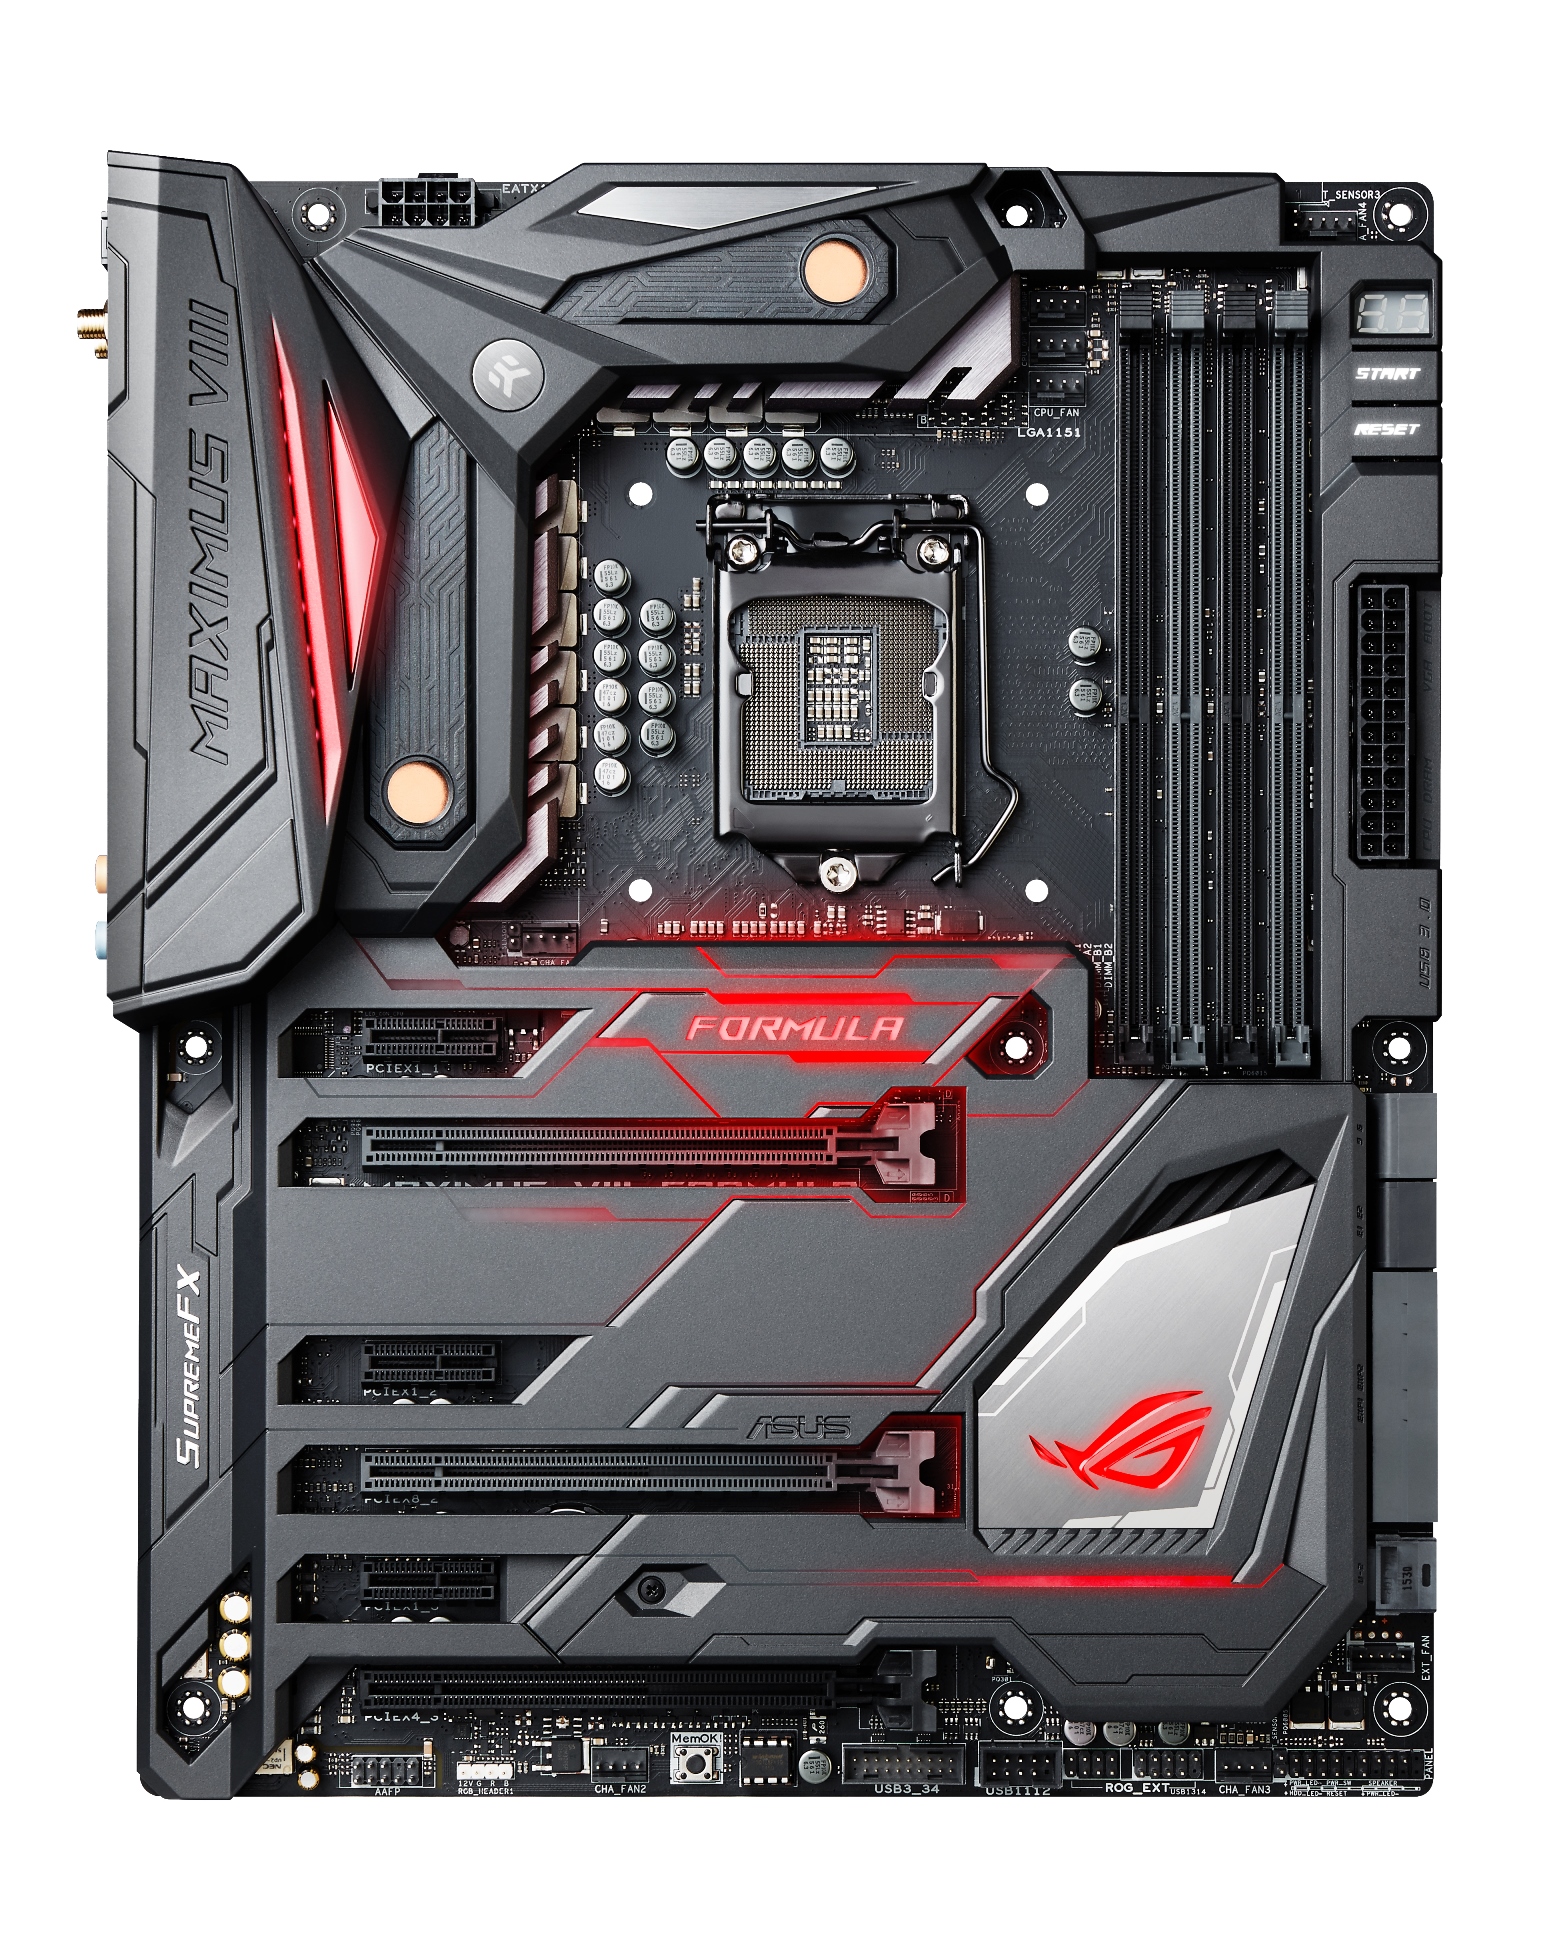 Media asset in full size related to 3dfxzone.it news item entitled as follows: ASUS annuncia la gaming motherboard ROG Maximus VIII Formula | Image Name: news23560_ASUS-ROG-Maximus-VIII-Formula_1.jpg